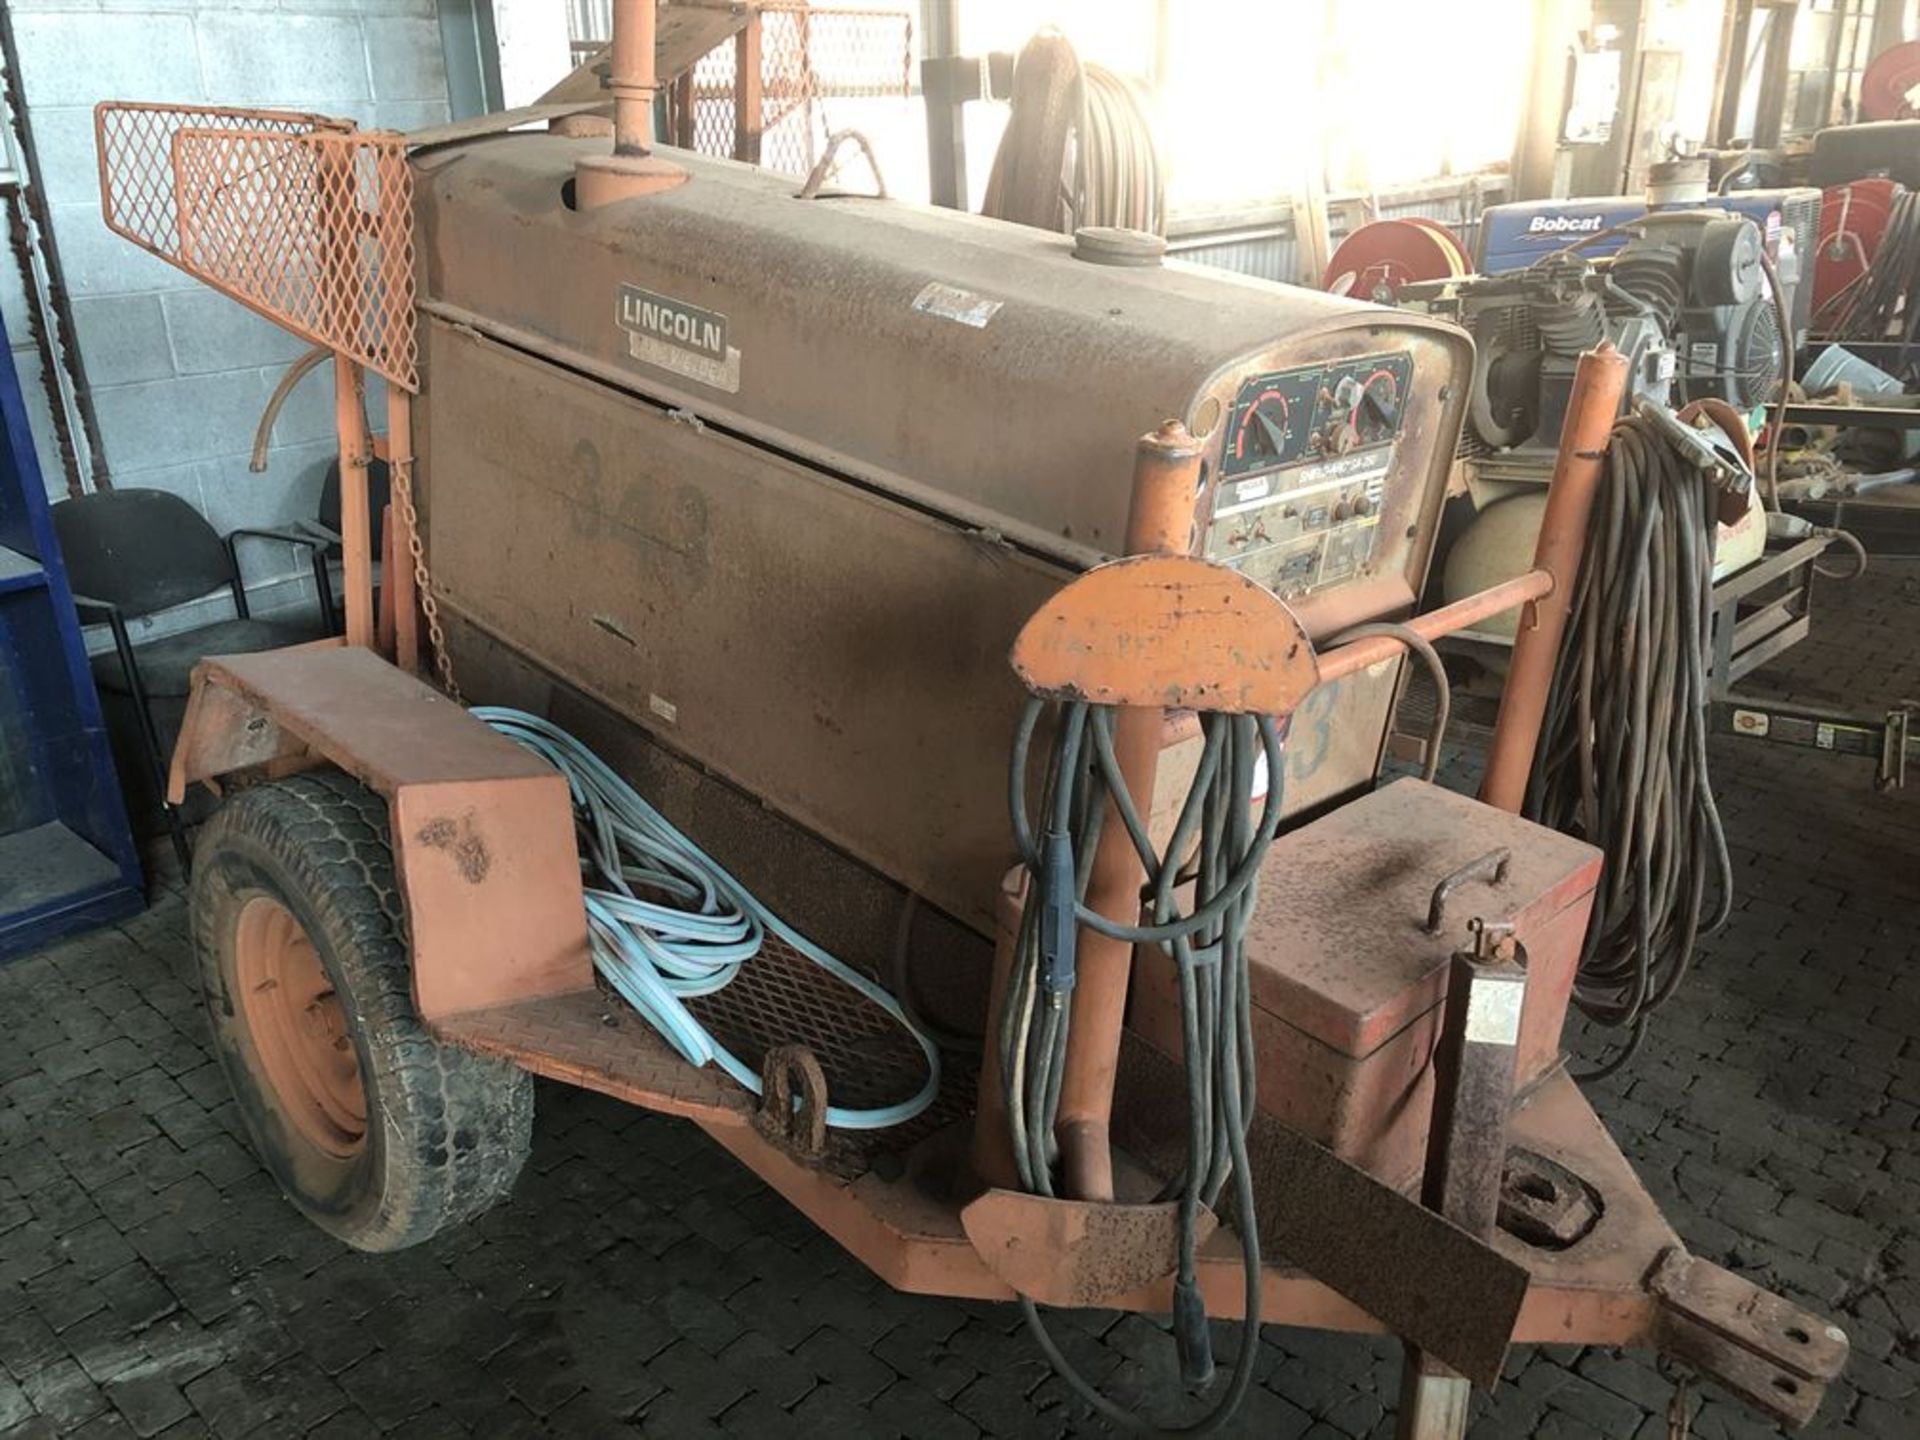 Lot Comprising of Unknown Make Trailer, Lincoln Shield-ARC SA-250 Welding Power Source Generator,